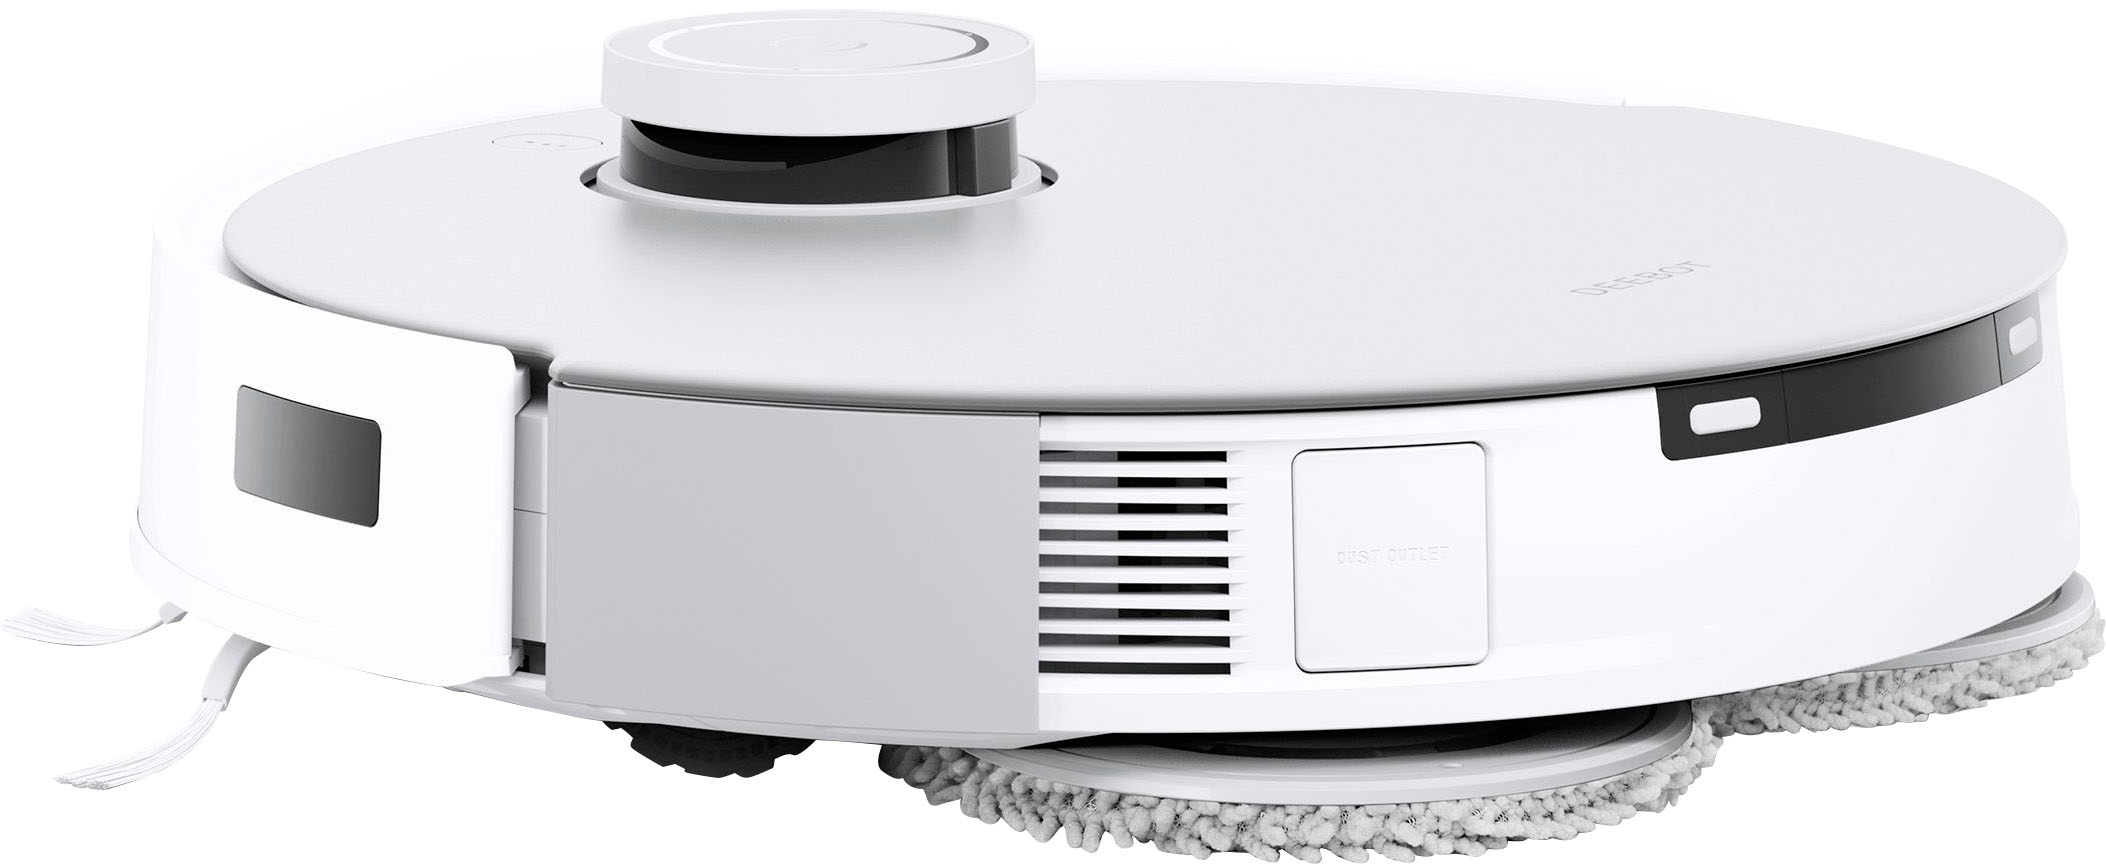 Empty OMNI Auto & Robotics Best ECOVACS with Buy Robot T20 Vacuum - OZMOT20M Connected WHITE Wi-Fi Station DEEBOT Self Washing Mop